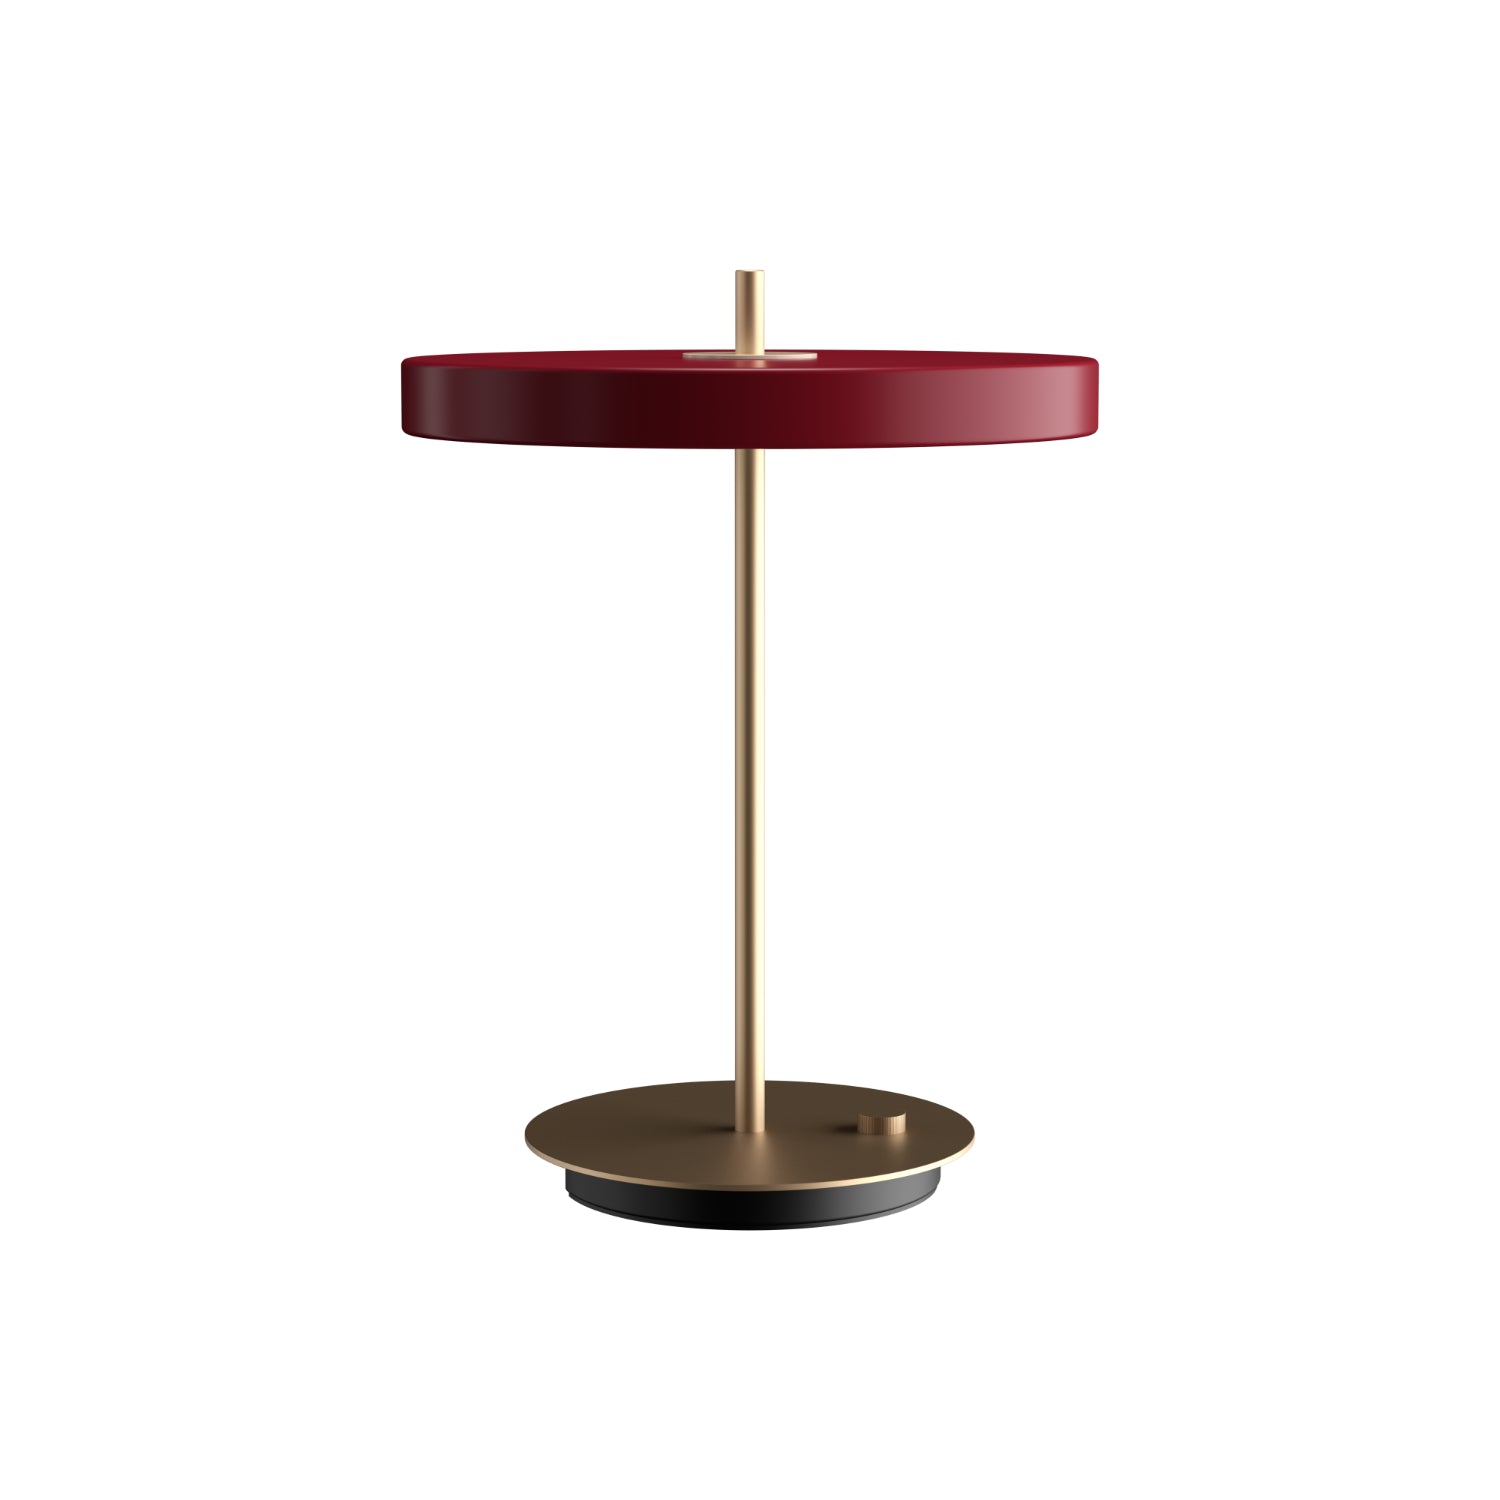 UMAGE - Asteria Table | Table lamp